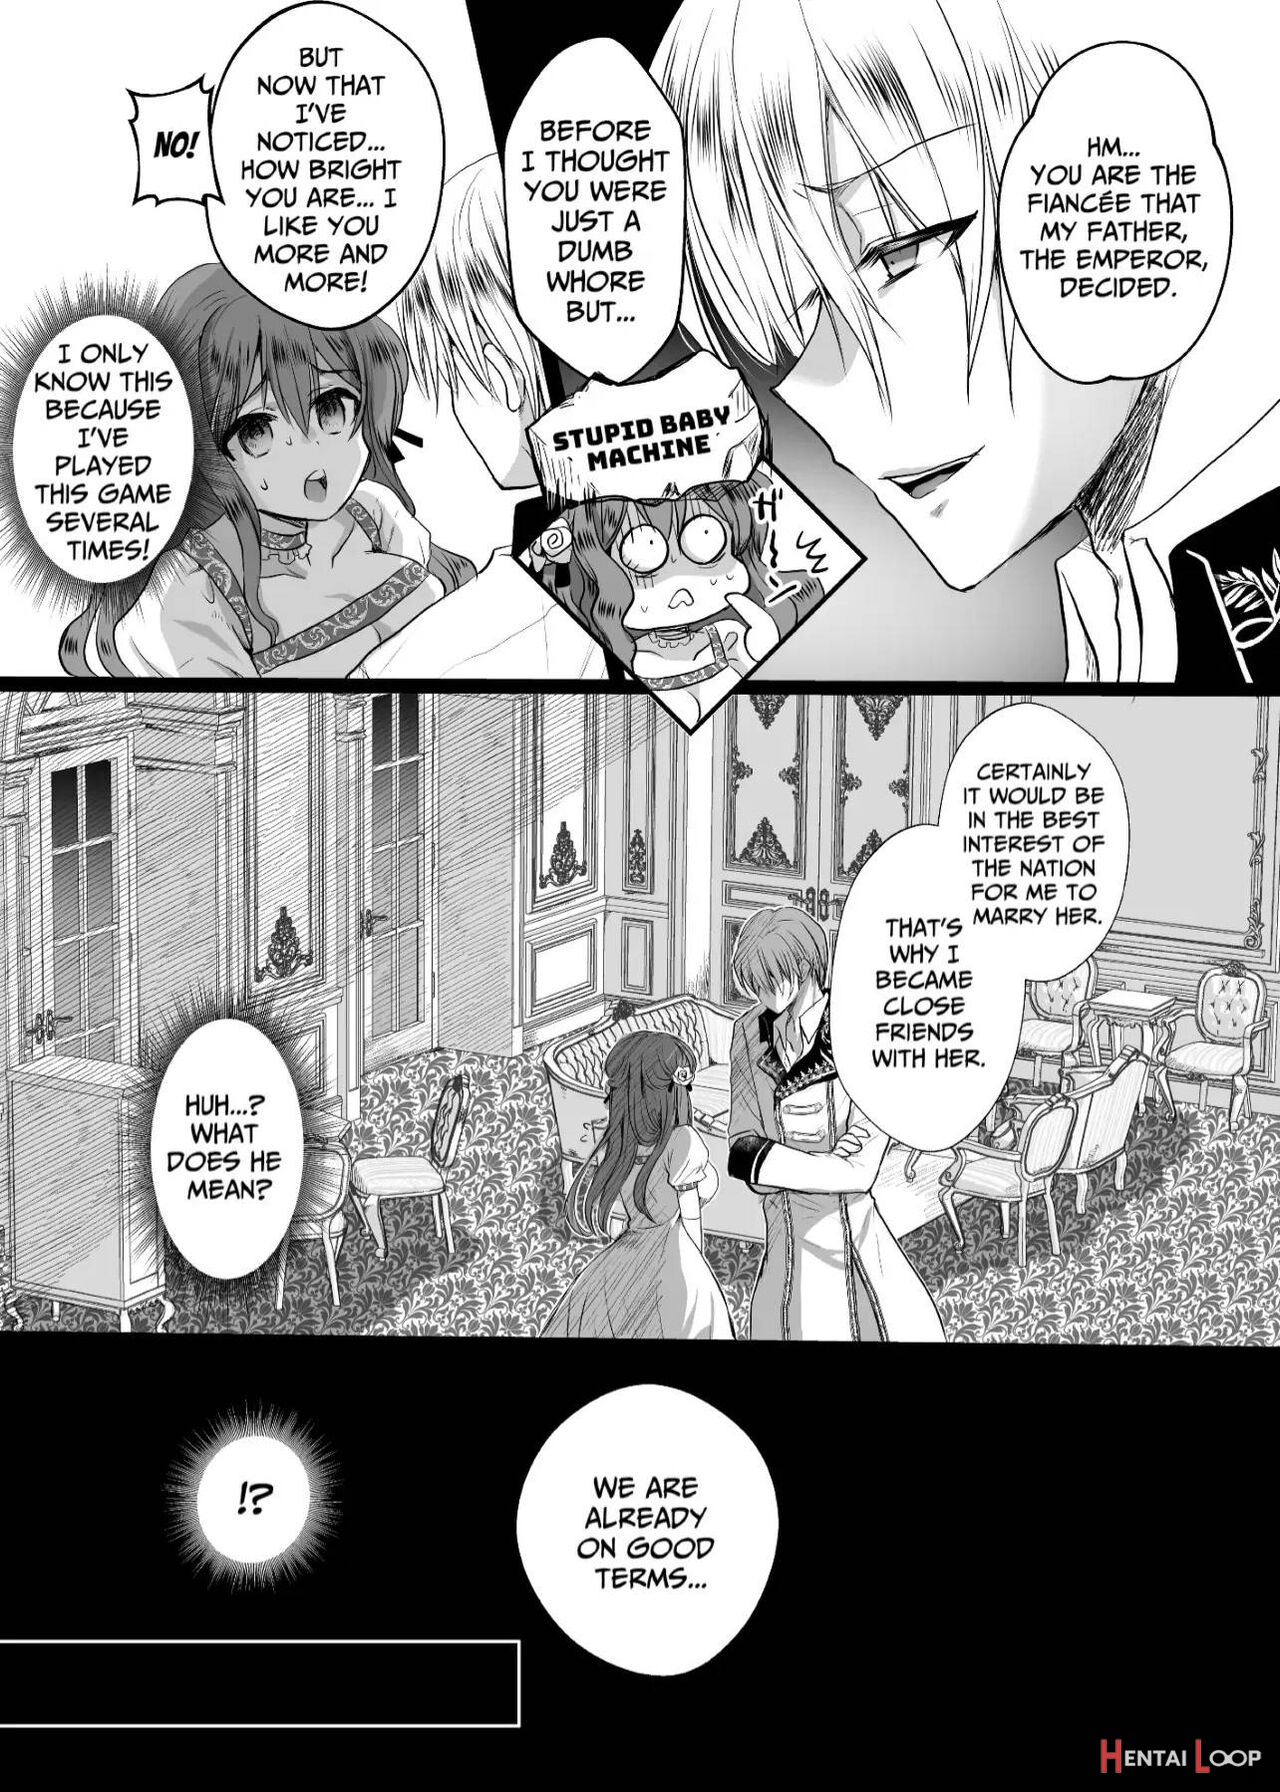  jk's Tragic Isekai Reincarnation As The Villainess ~but My Precious Side Character!~ 2 page 6